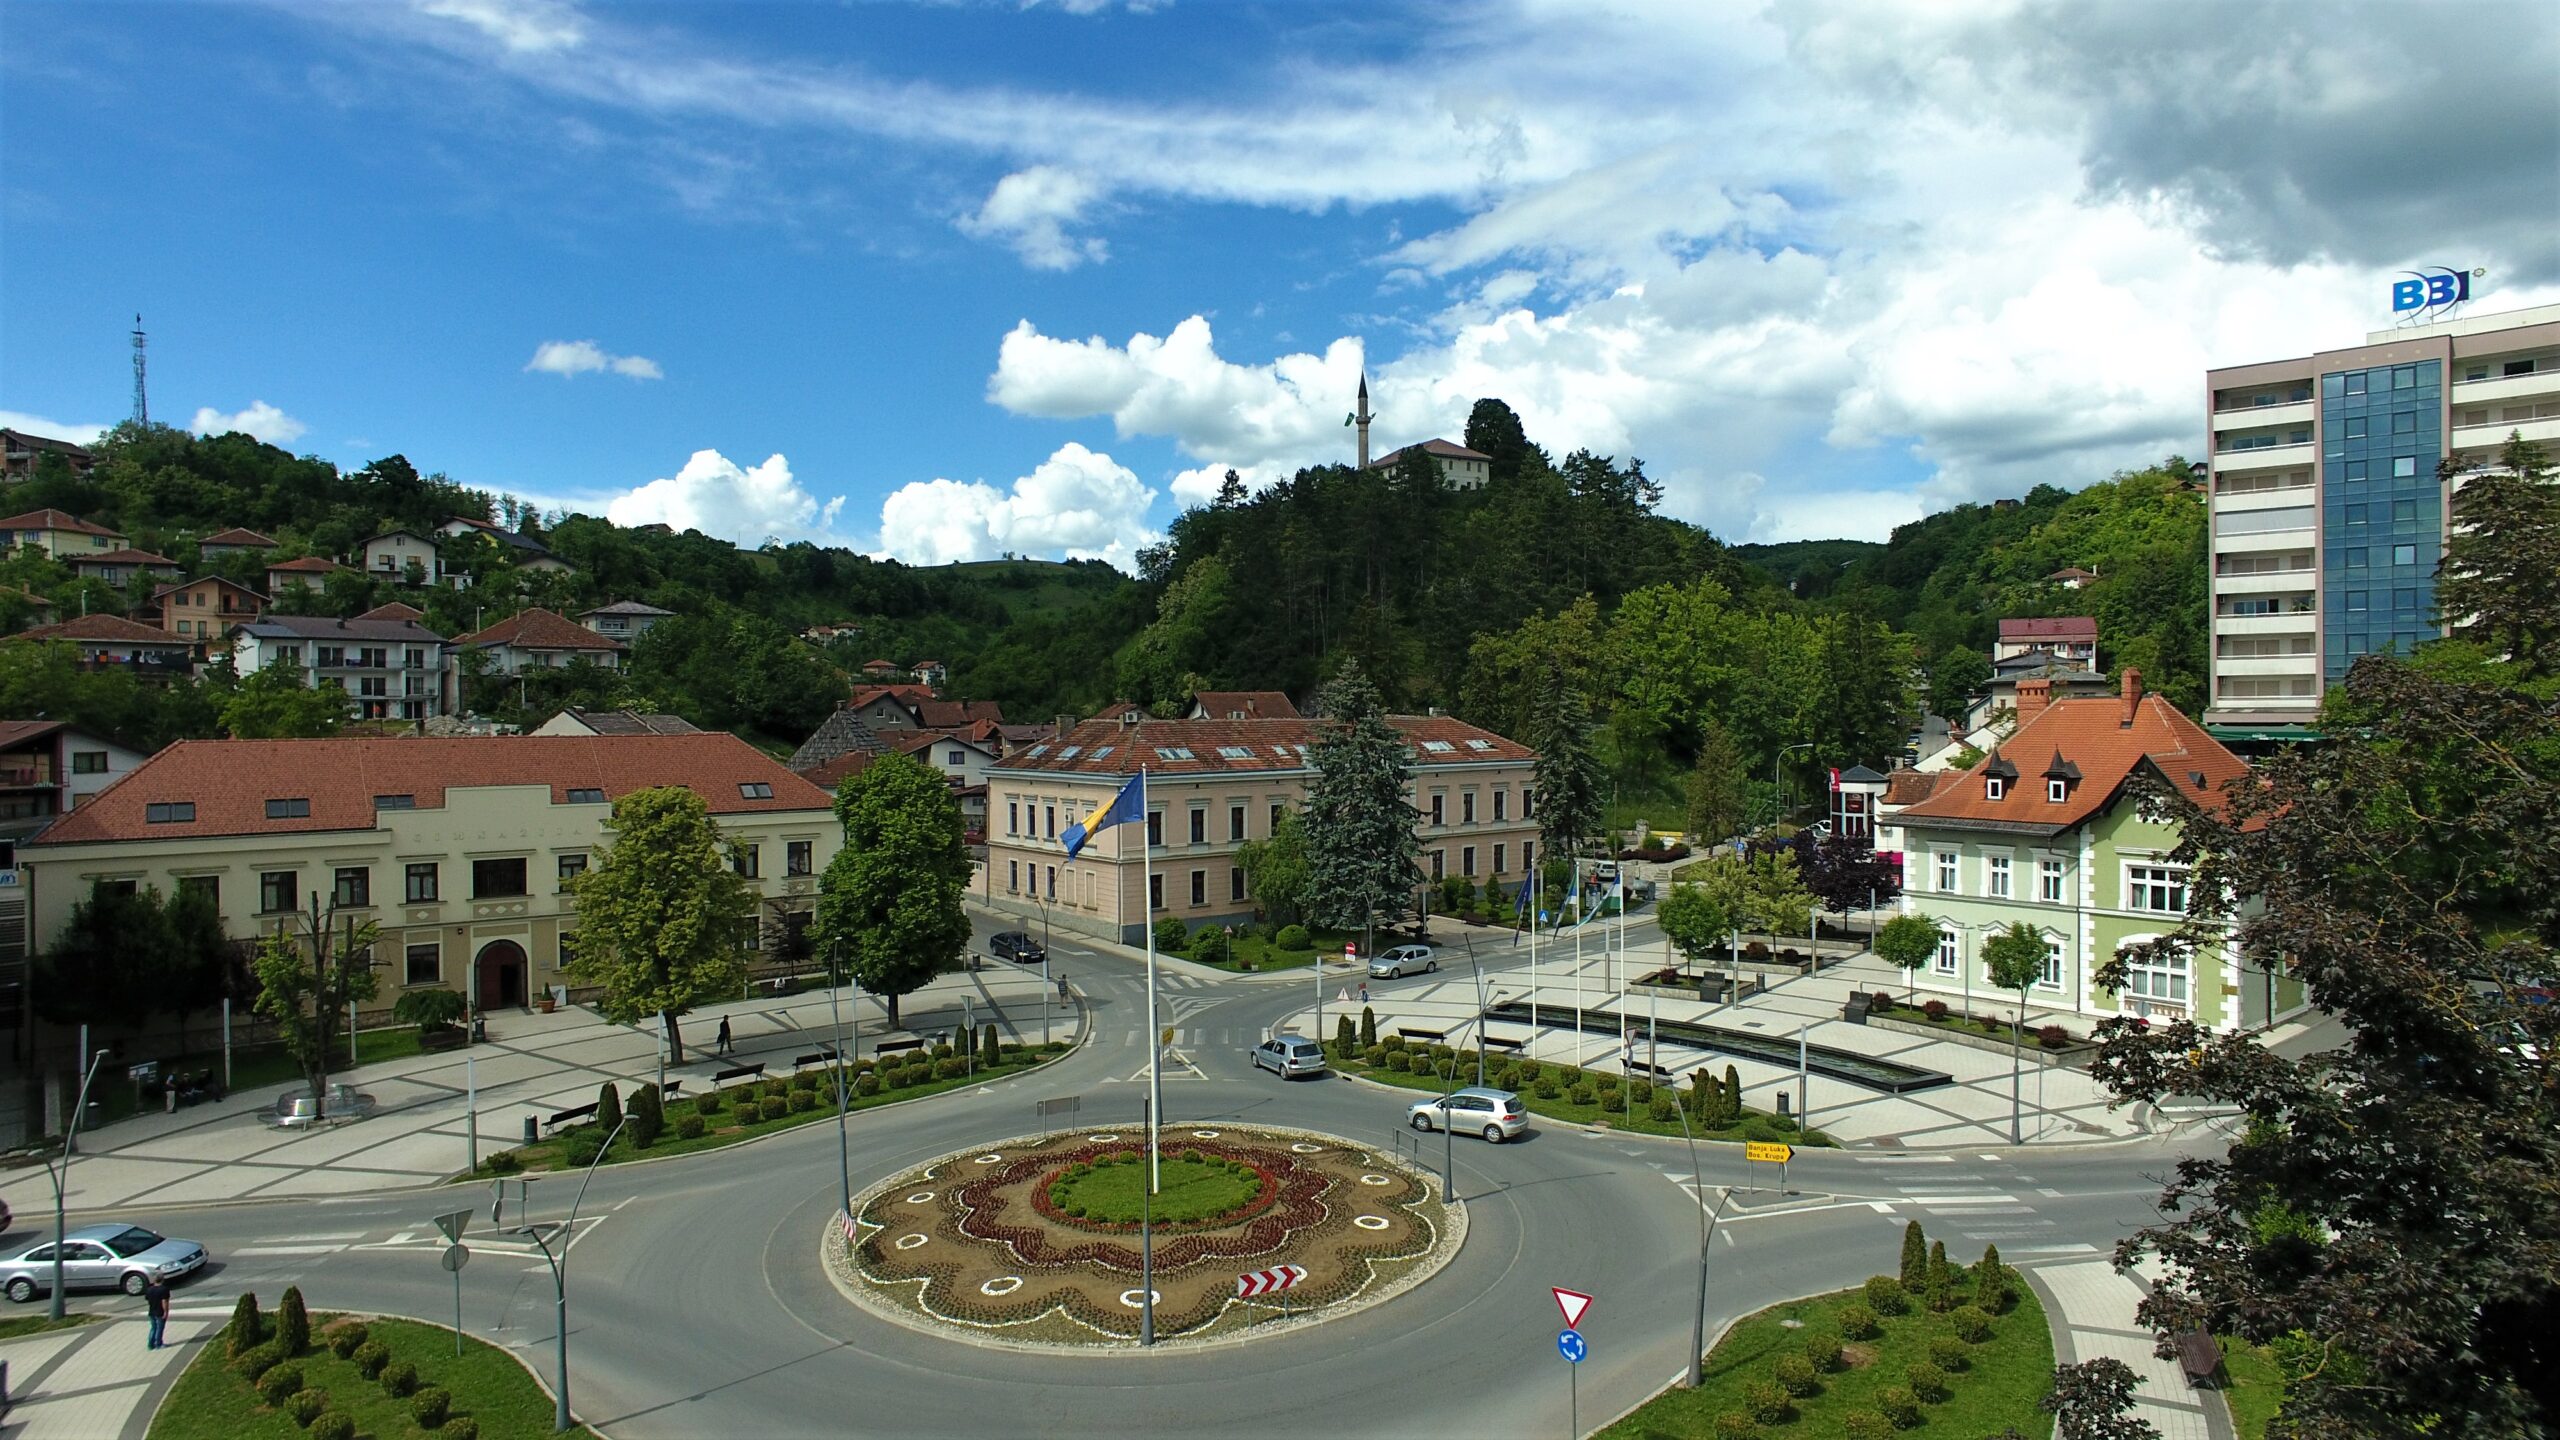  Cazin – a City with the Manners of a Gentleman and the Charm of an Authentic Bosnian